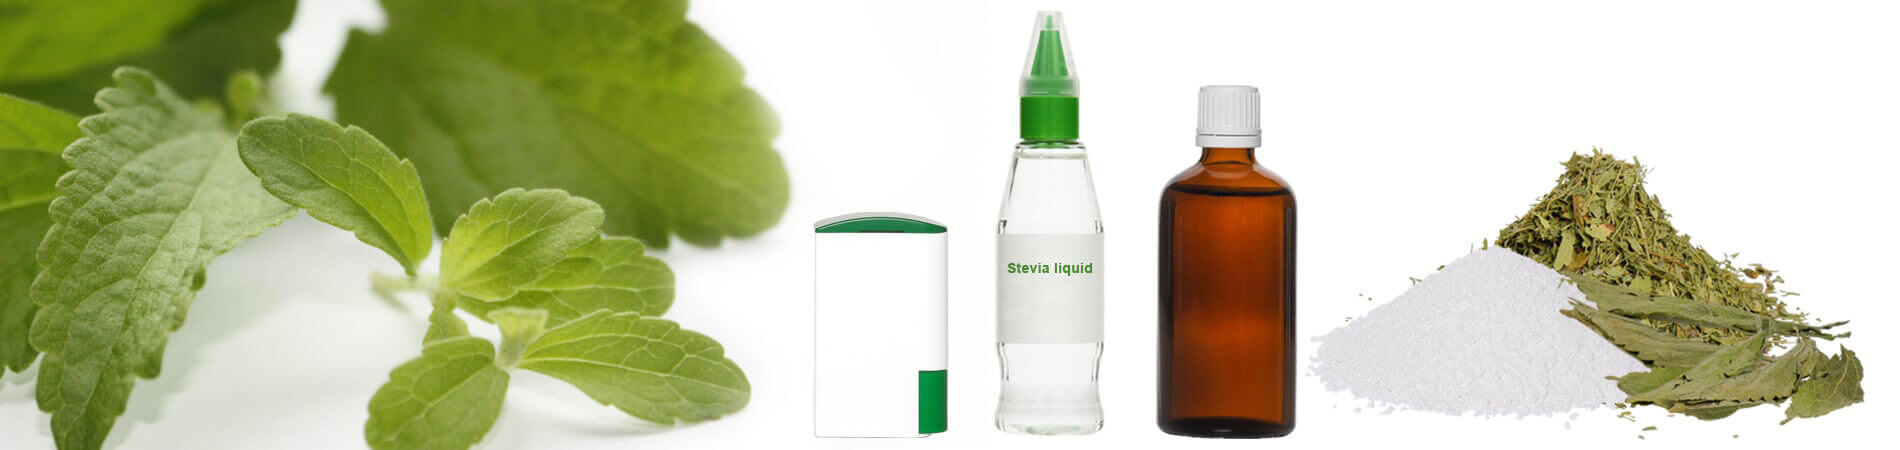 Buying Stevia | What you should consider when buying Stevia